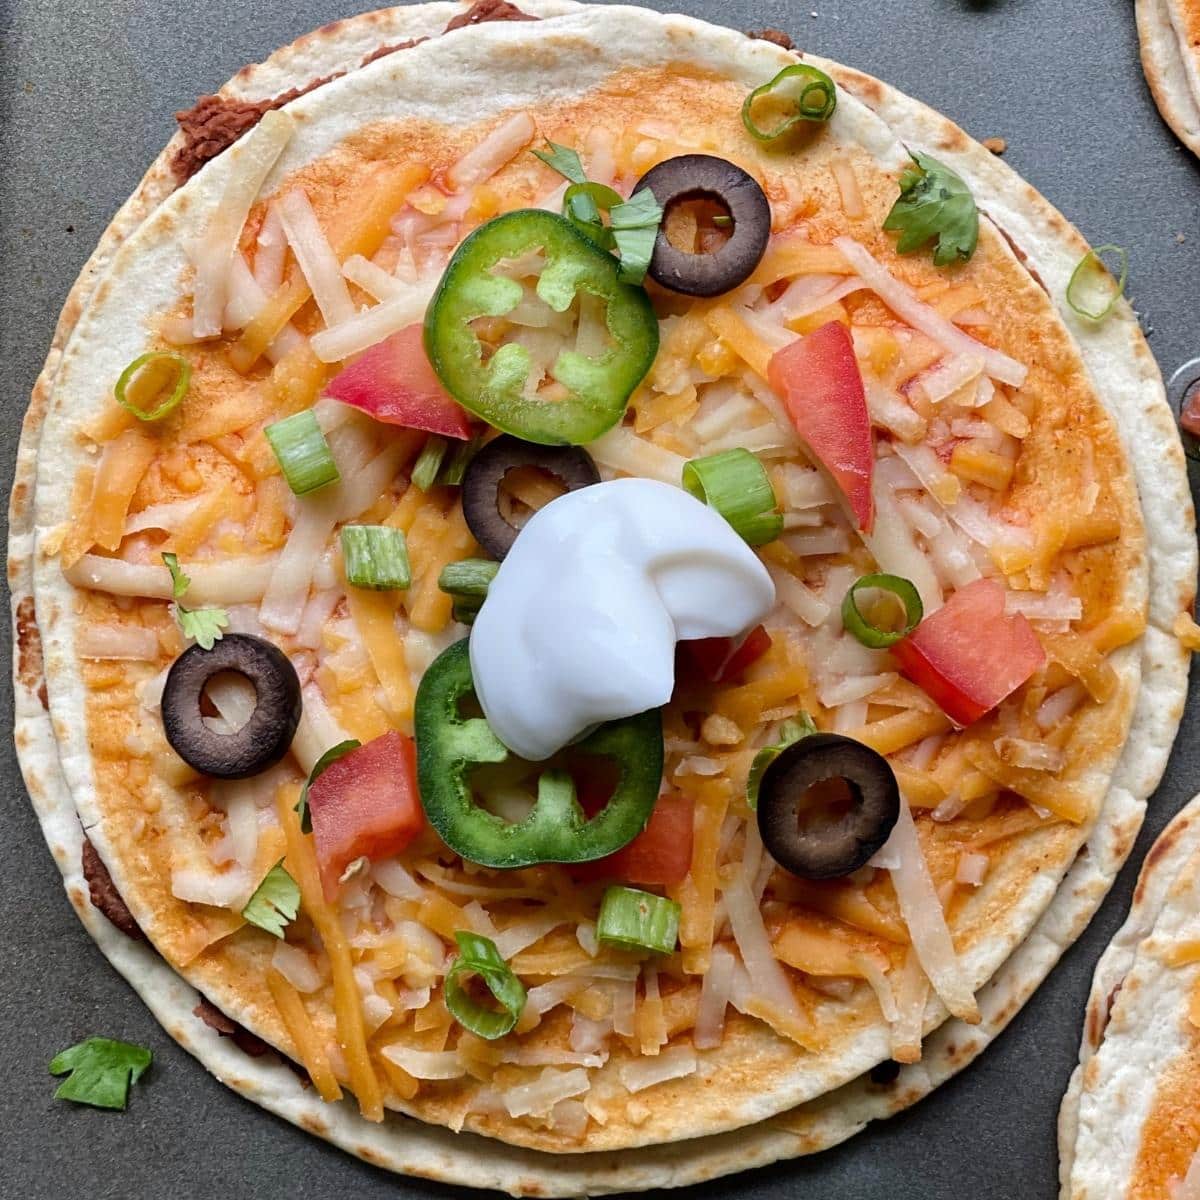 A close up view of a vegan Mexican pizza.